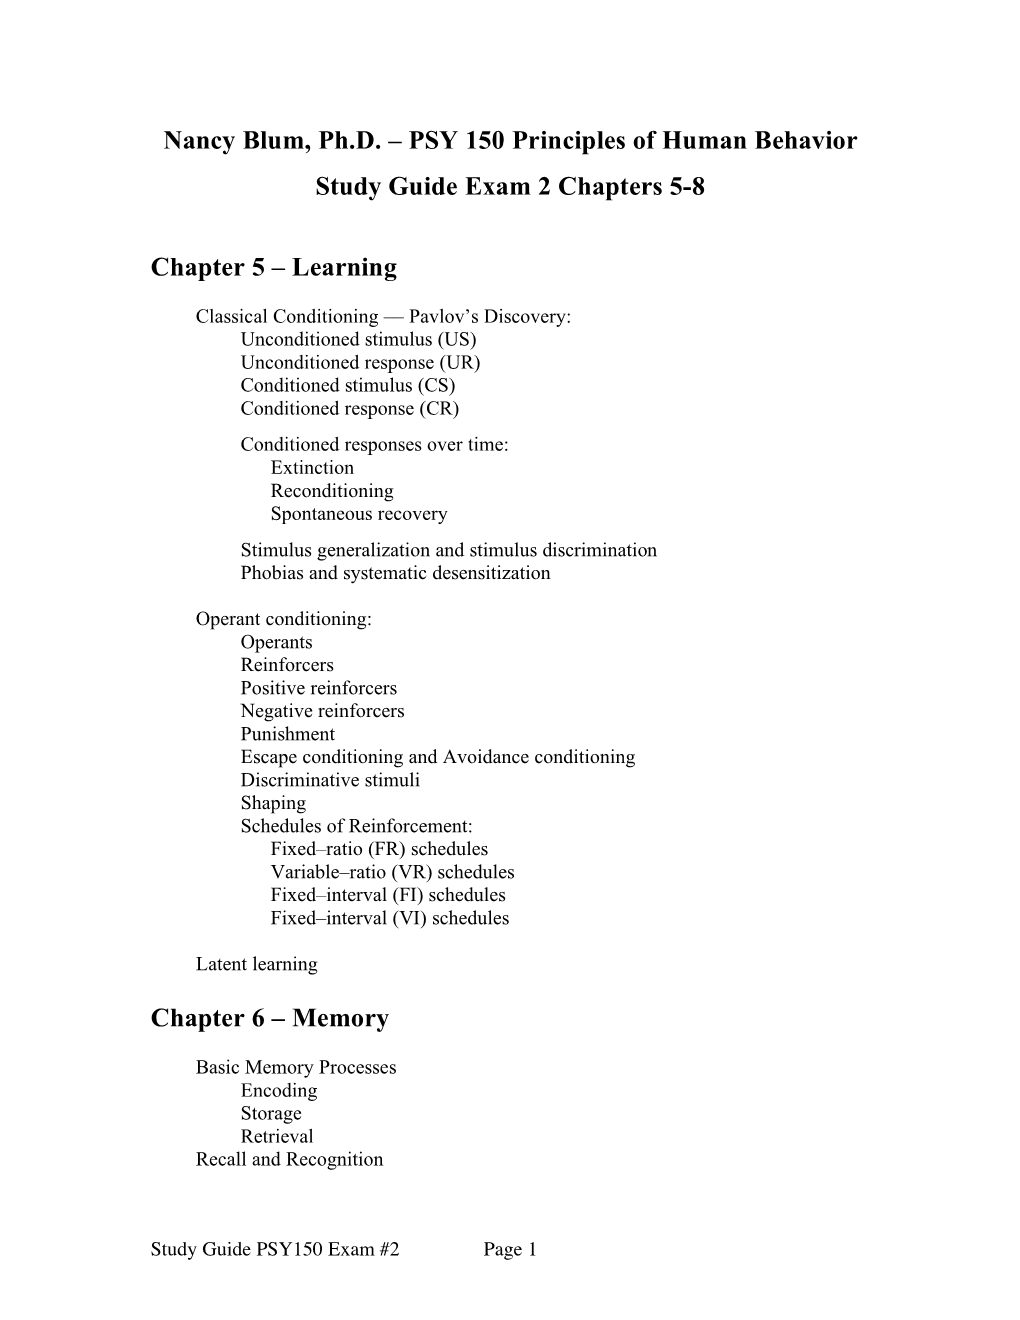 PSY 150 Principles of Human Behavior Study Guide Exam 2 Chapters 5-8